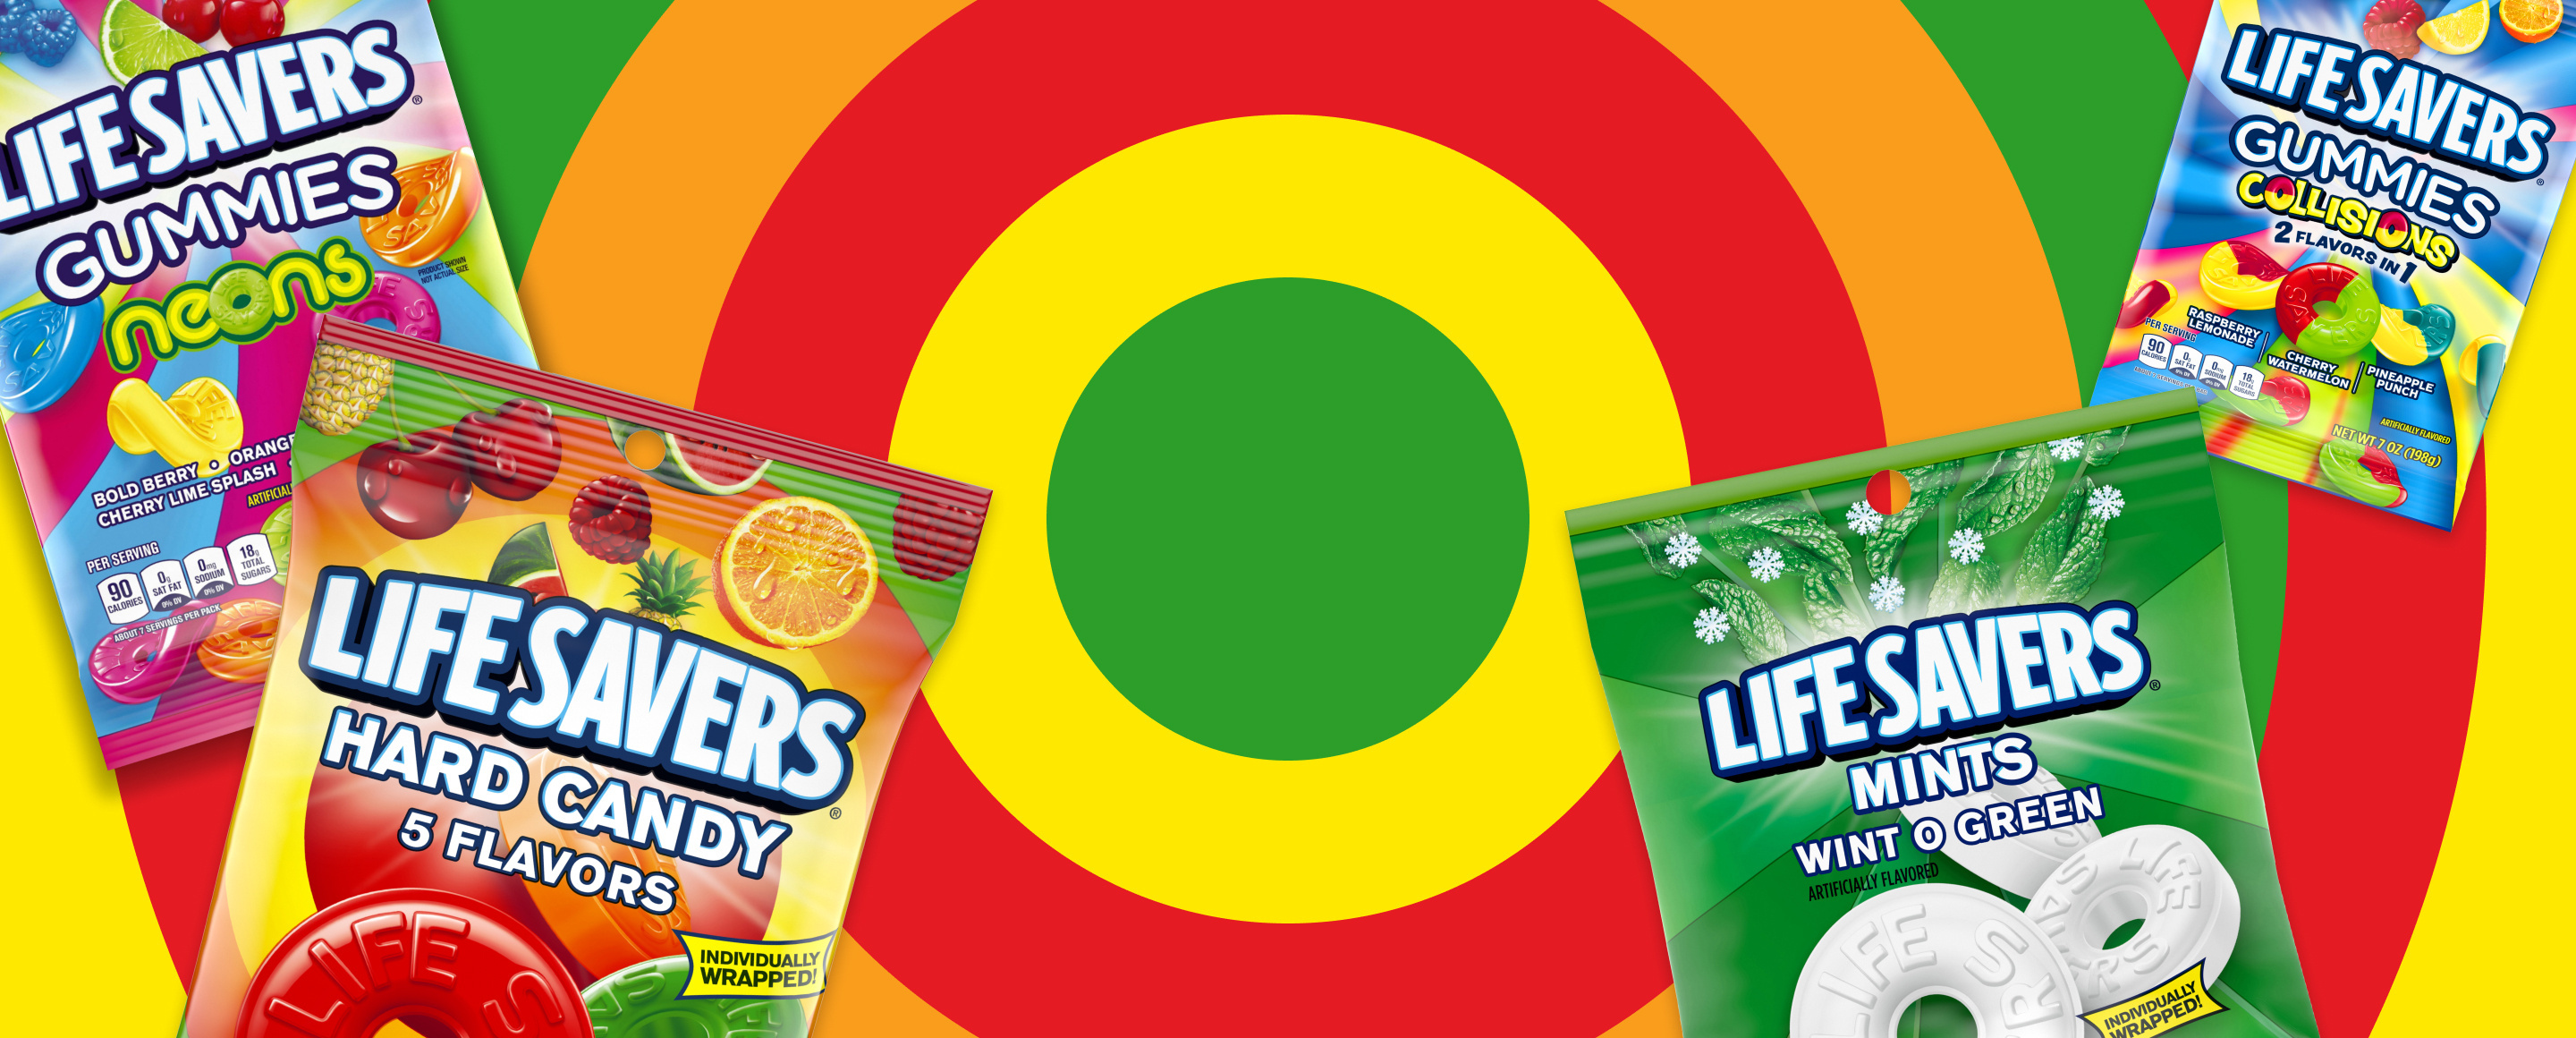 Four packages of various LIfe Savers candies in front of colored circular background